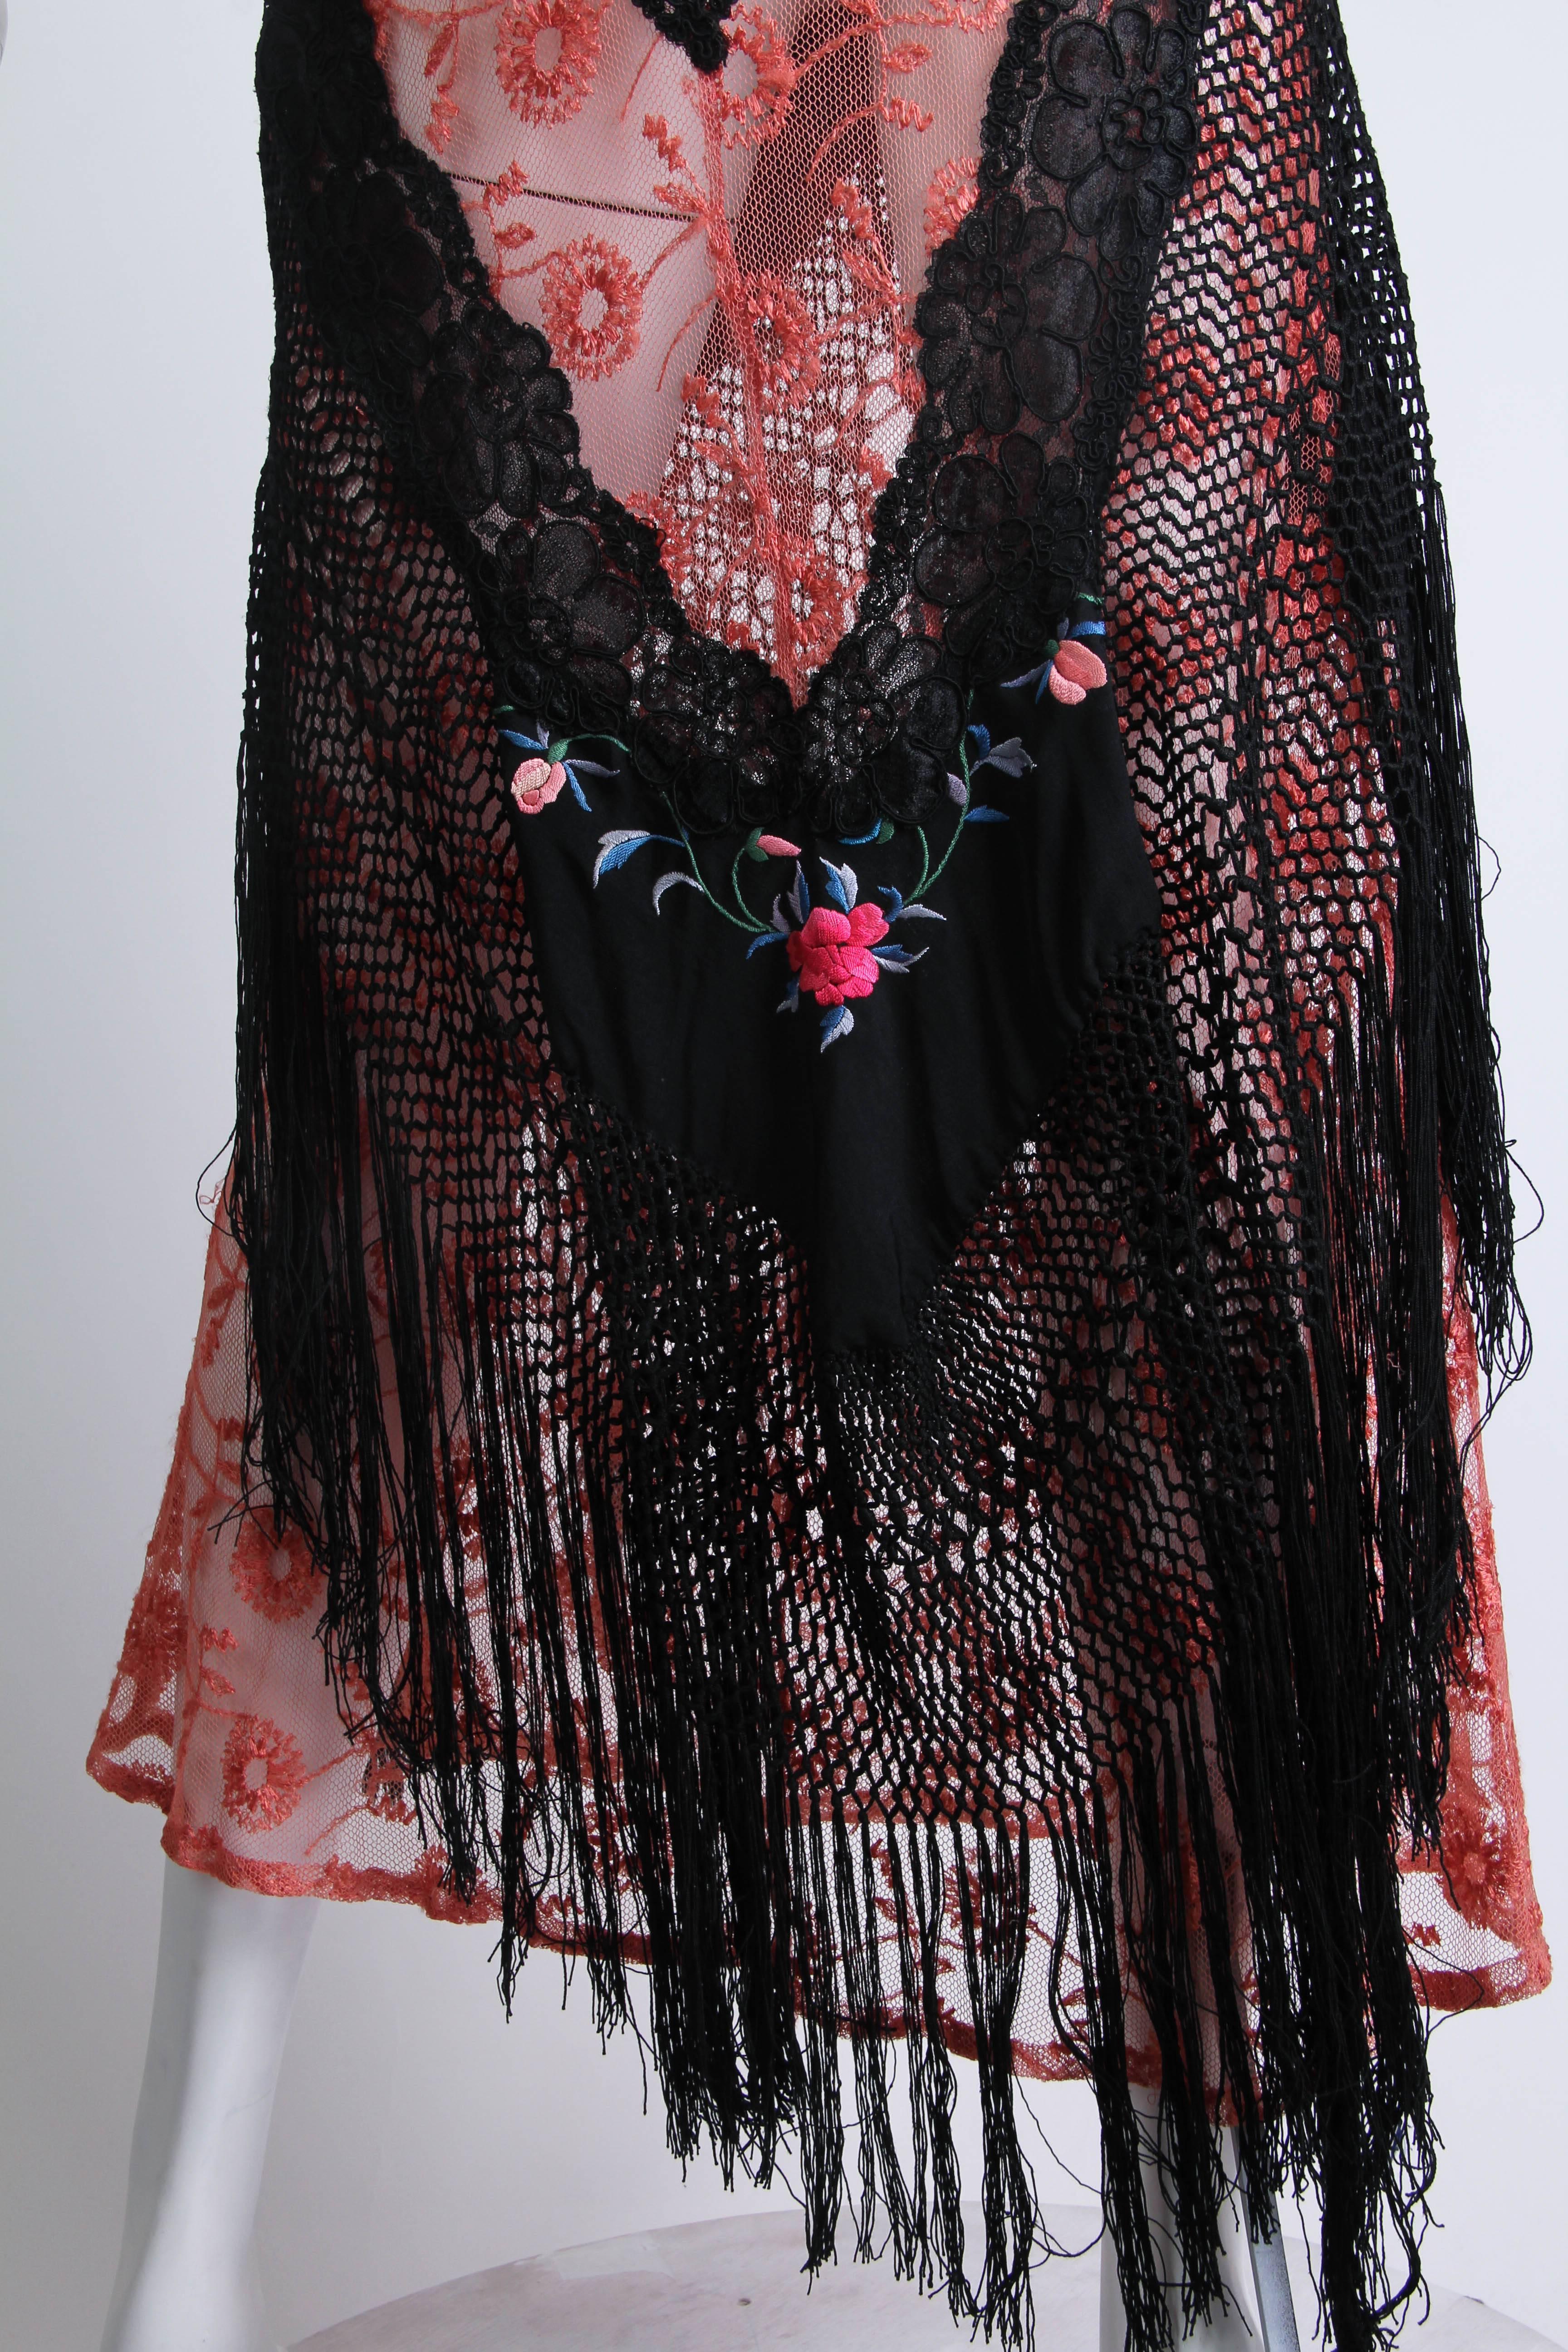 1930s Bias Cut Silk Net Lace Dress Re-Built with Chinese Embroidery and Fringe 4